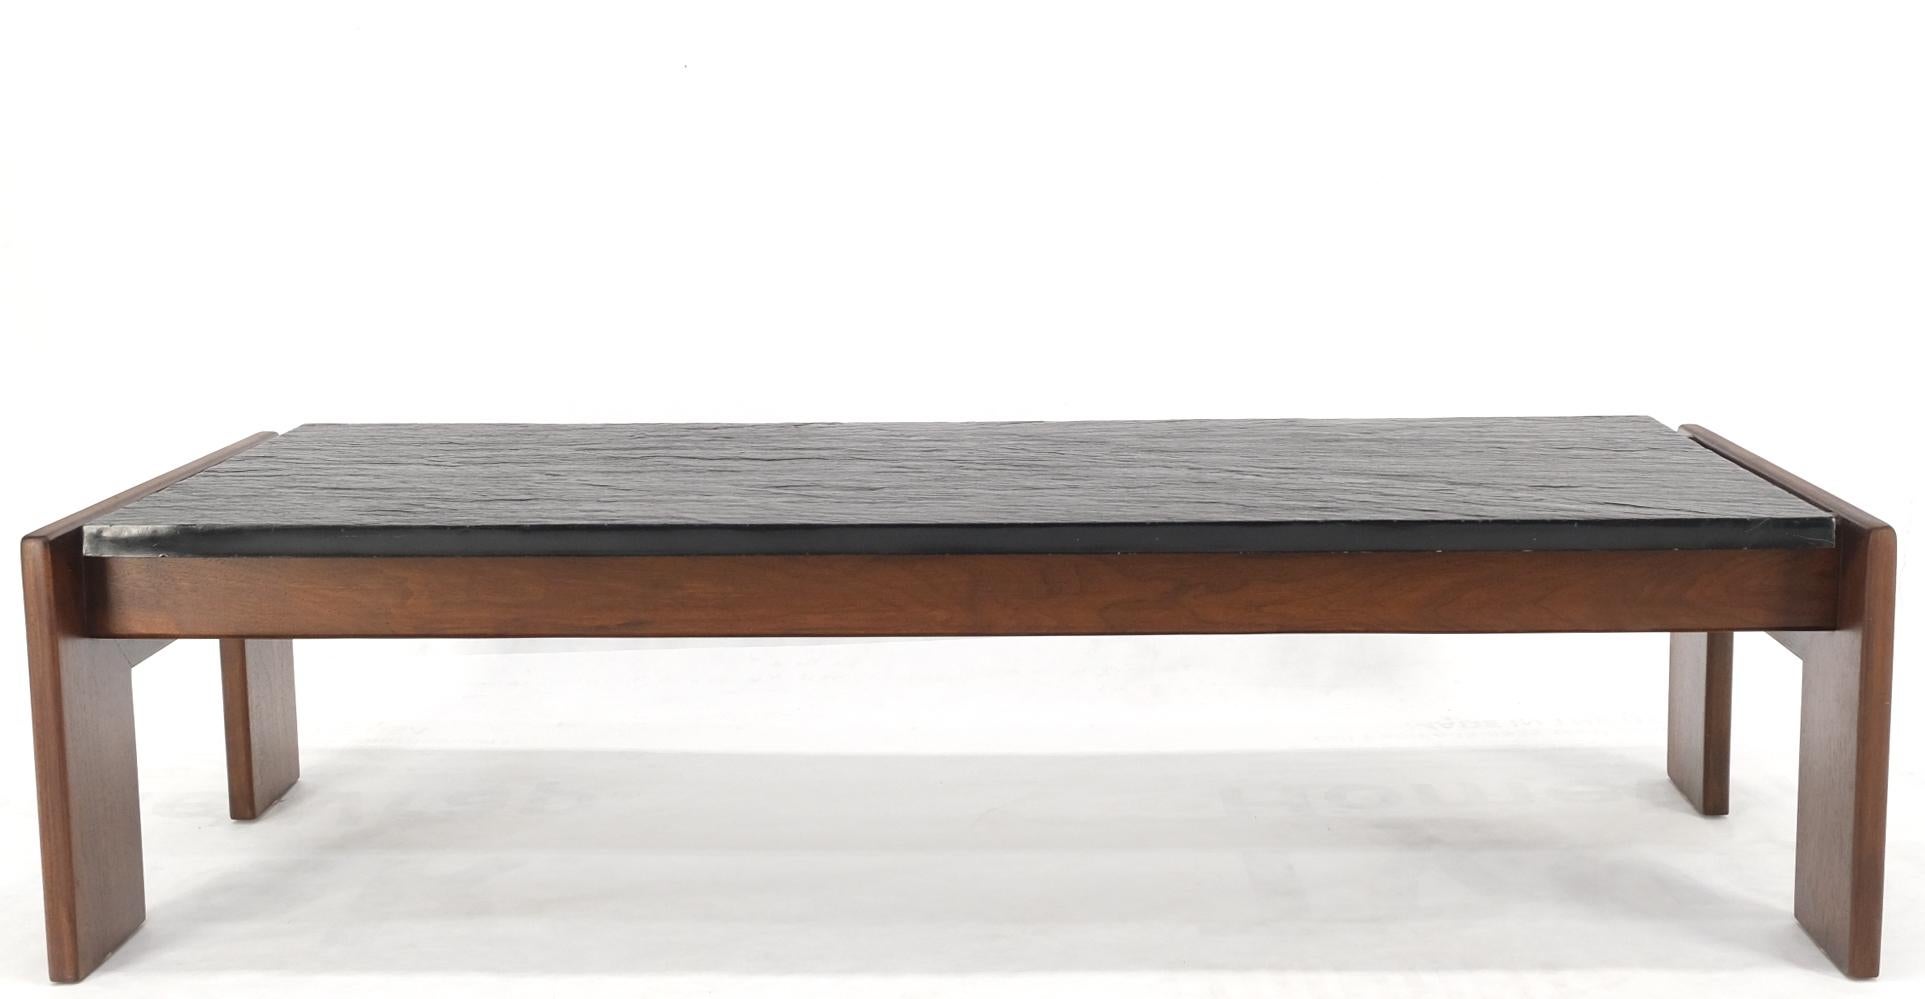 Adrian Pearsall Slate Textured Top Walnut Base Rectangle Coffee Table Mint 4